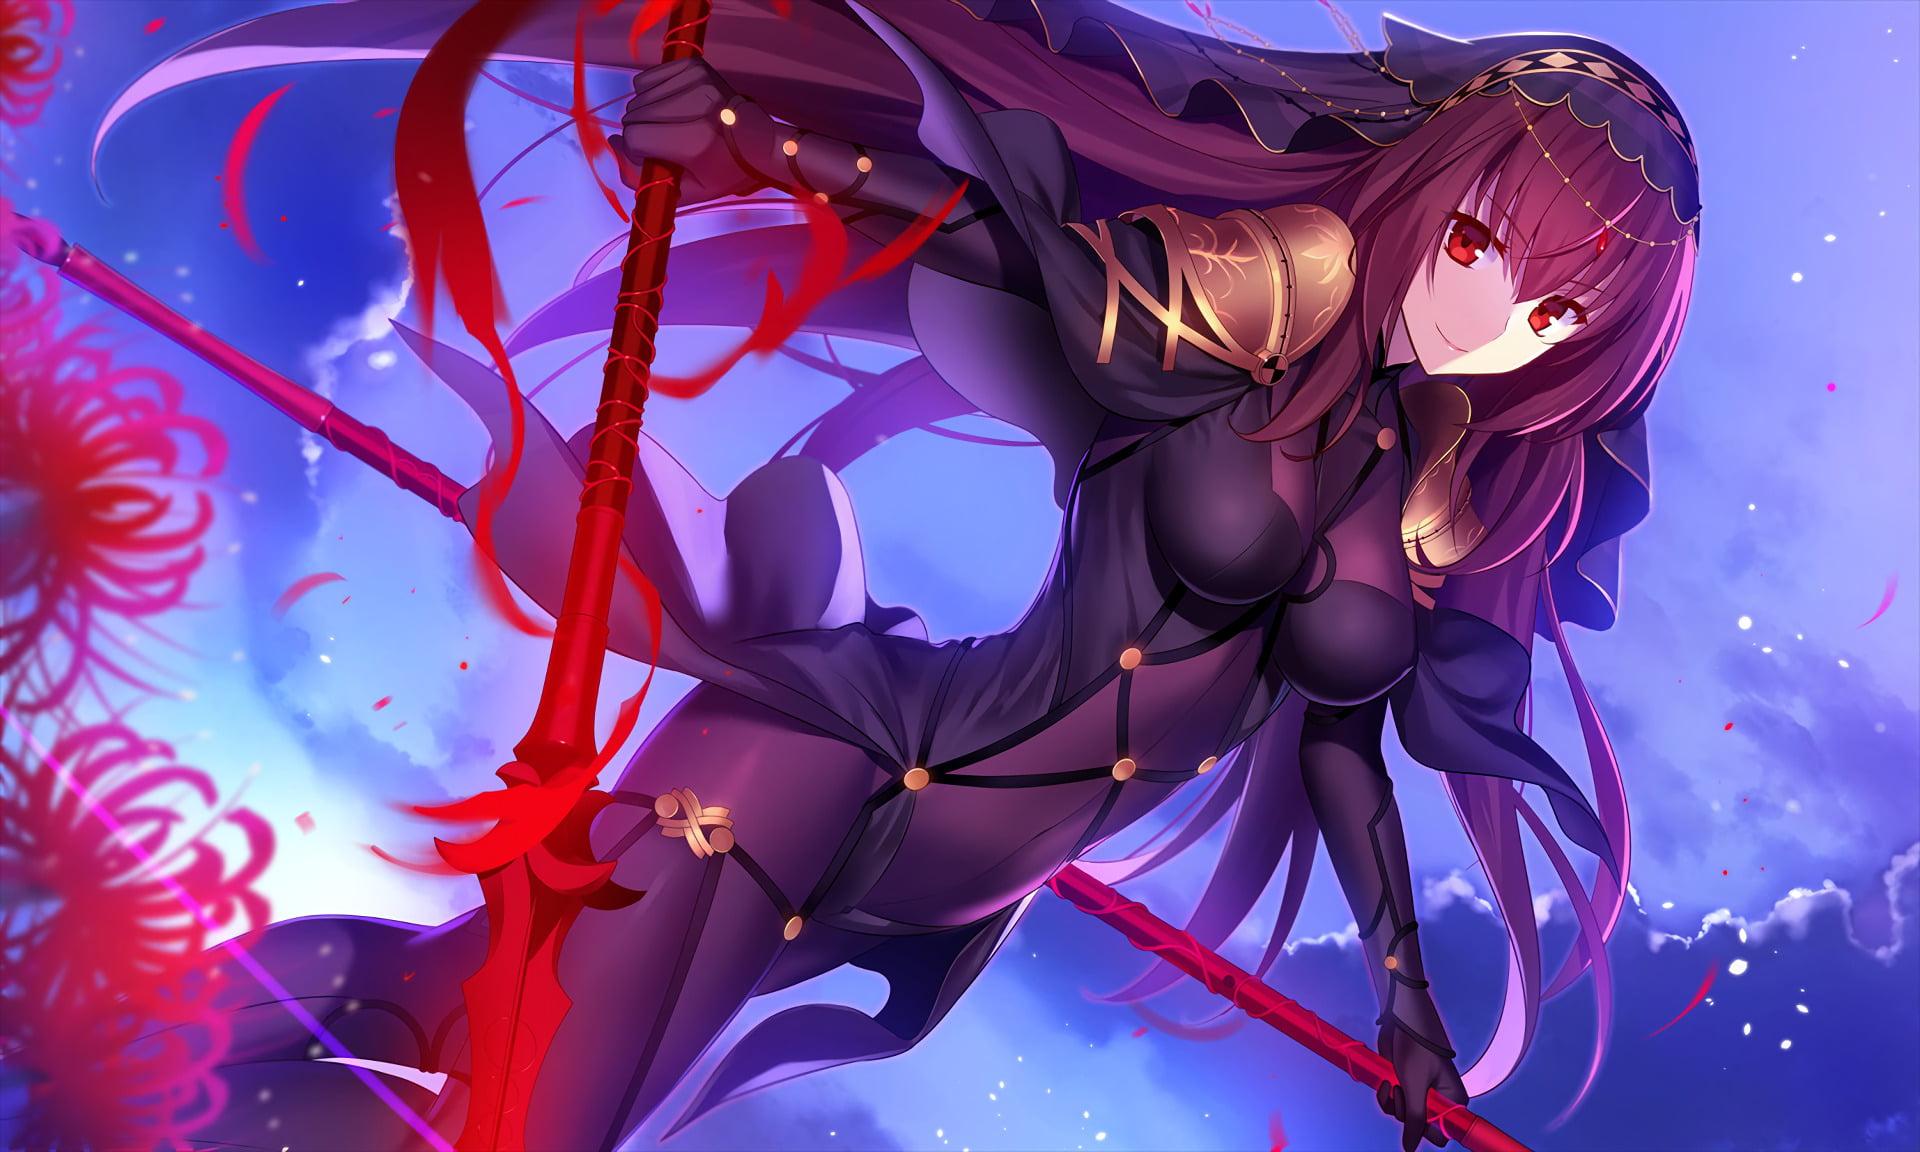 Scathach.